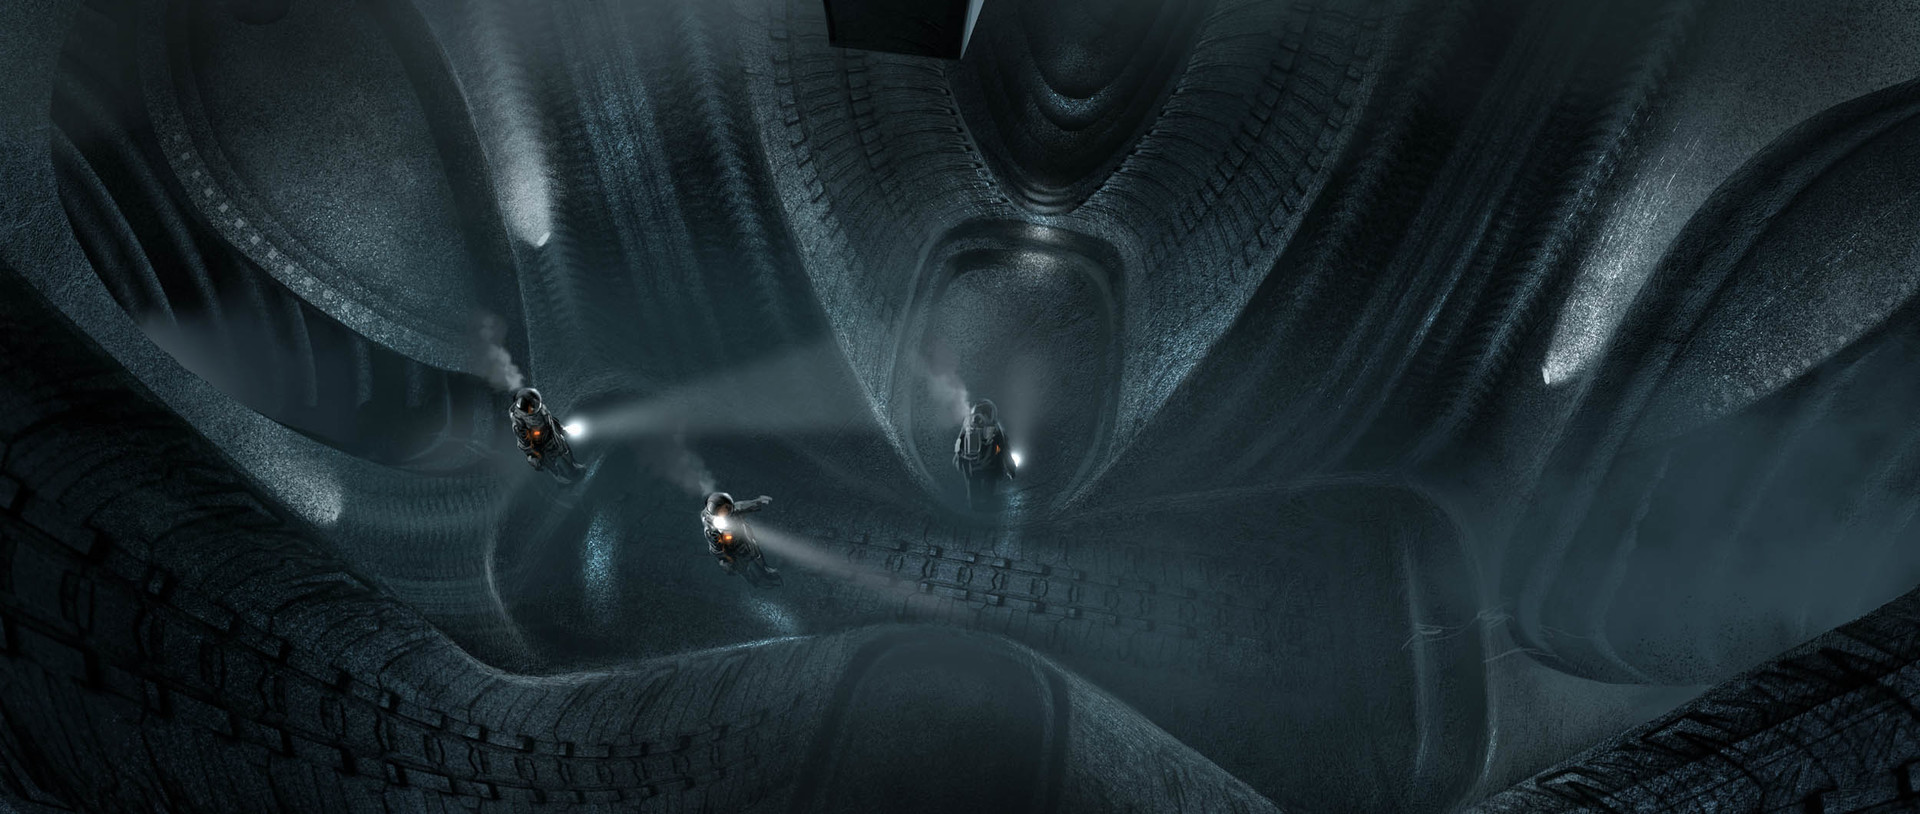 David Levy worked on the concept art for Prometheus. 